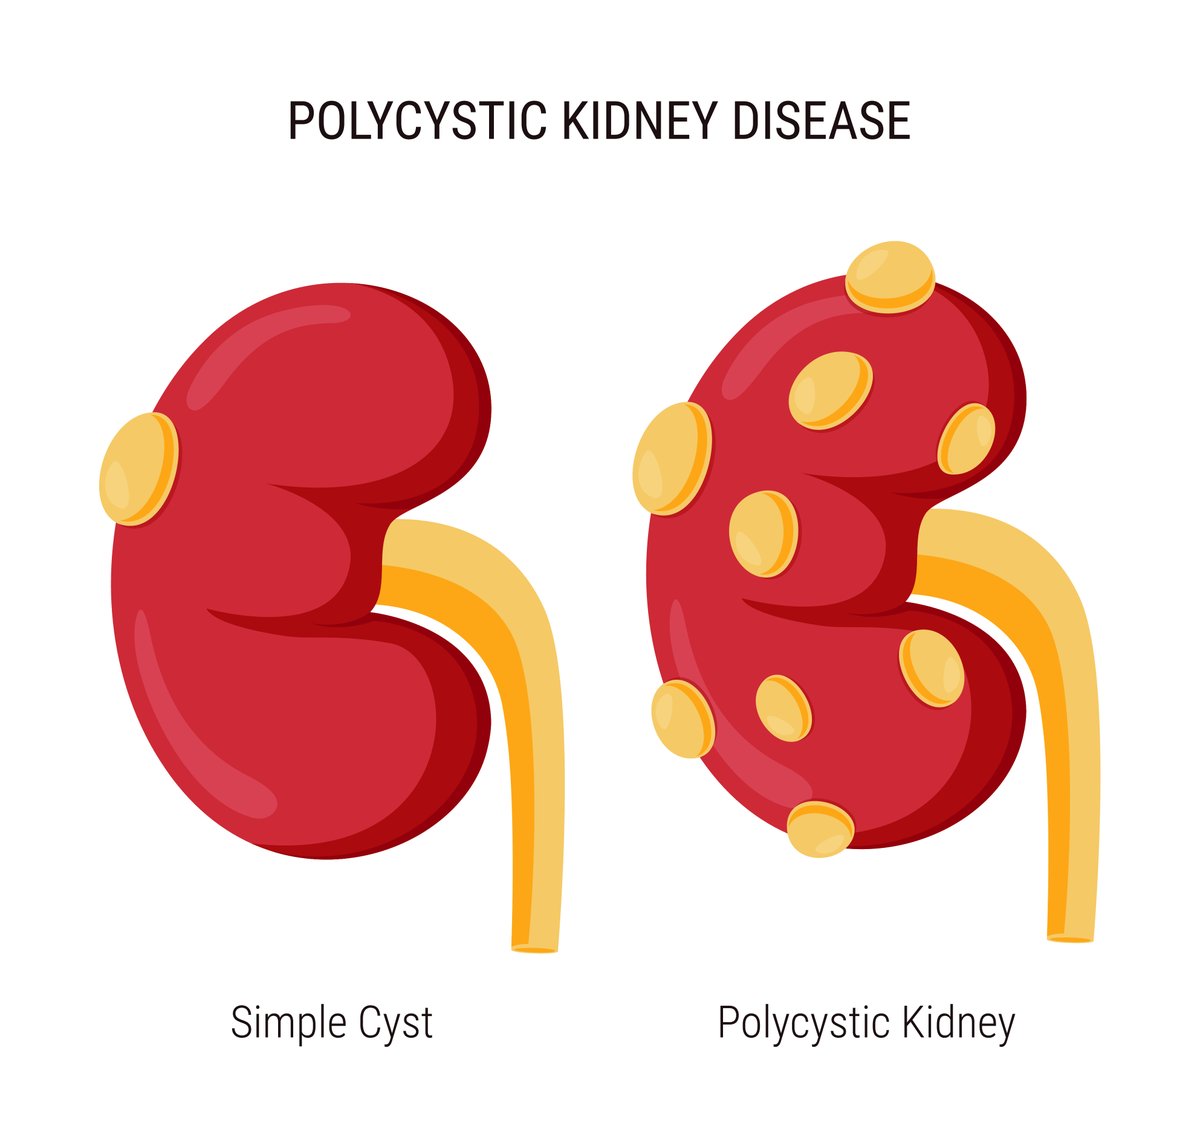 There are two kinds of peritoneal dialysis: @nkf * Continuous Ambulatory Peritoneal Dialysis (CAPD) * Automated Peritoneal Dialysis (APD) Read here - ow.ly/5Vqu50R86gQ #health #dialysis #transplant #KidneyDisease #CKD #ClinicalRenalAssociates